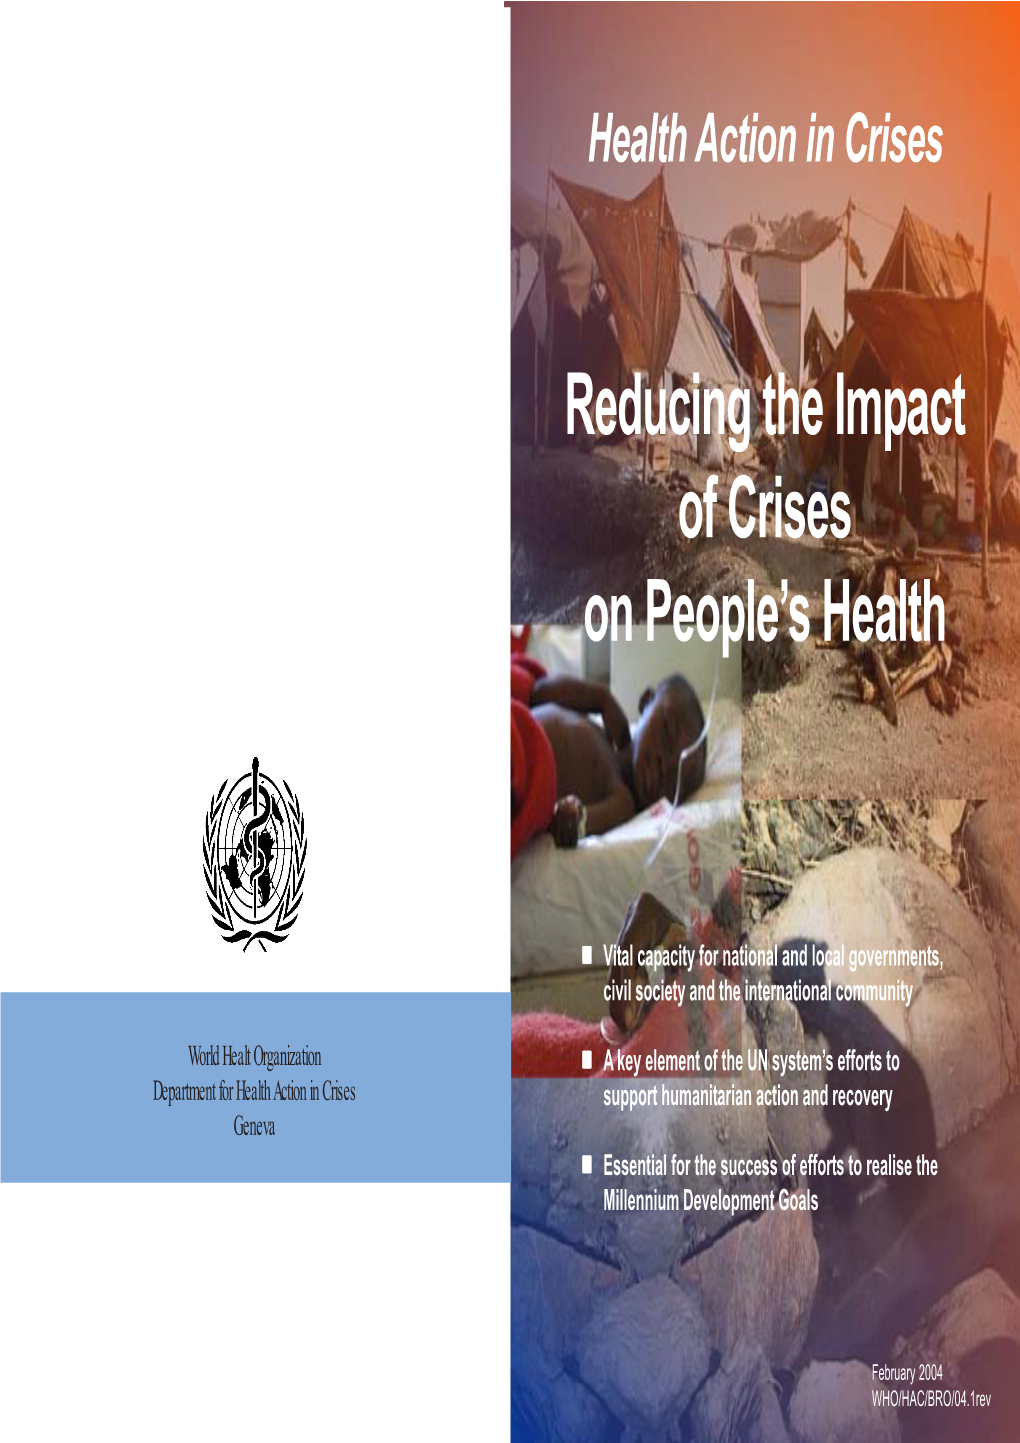 Reducing the Impact of Crises on People's Health